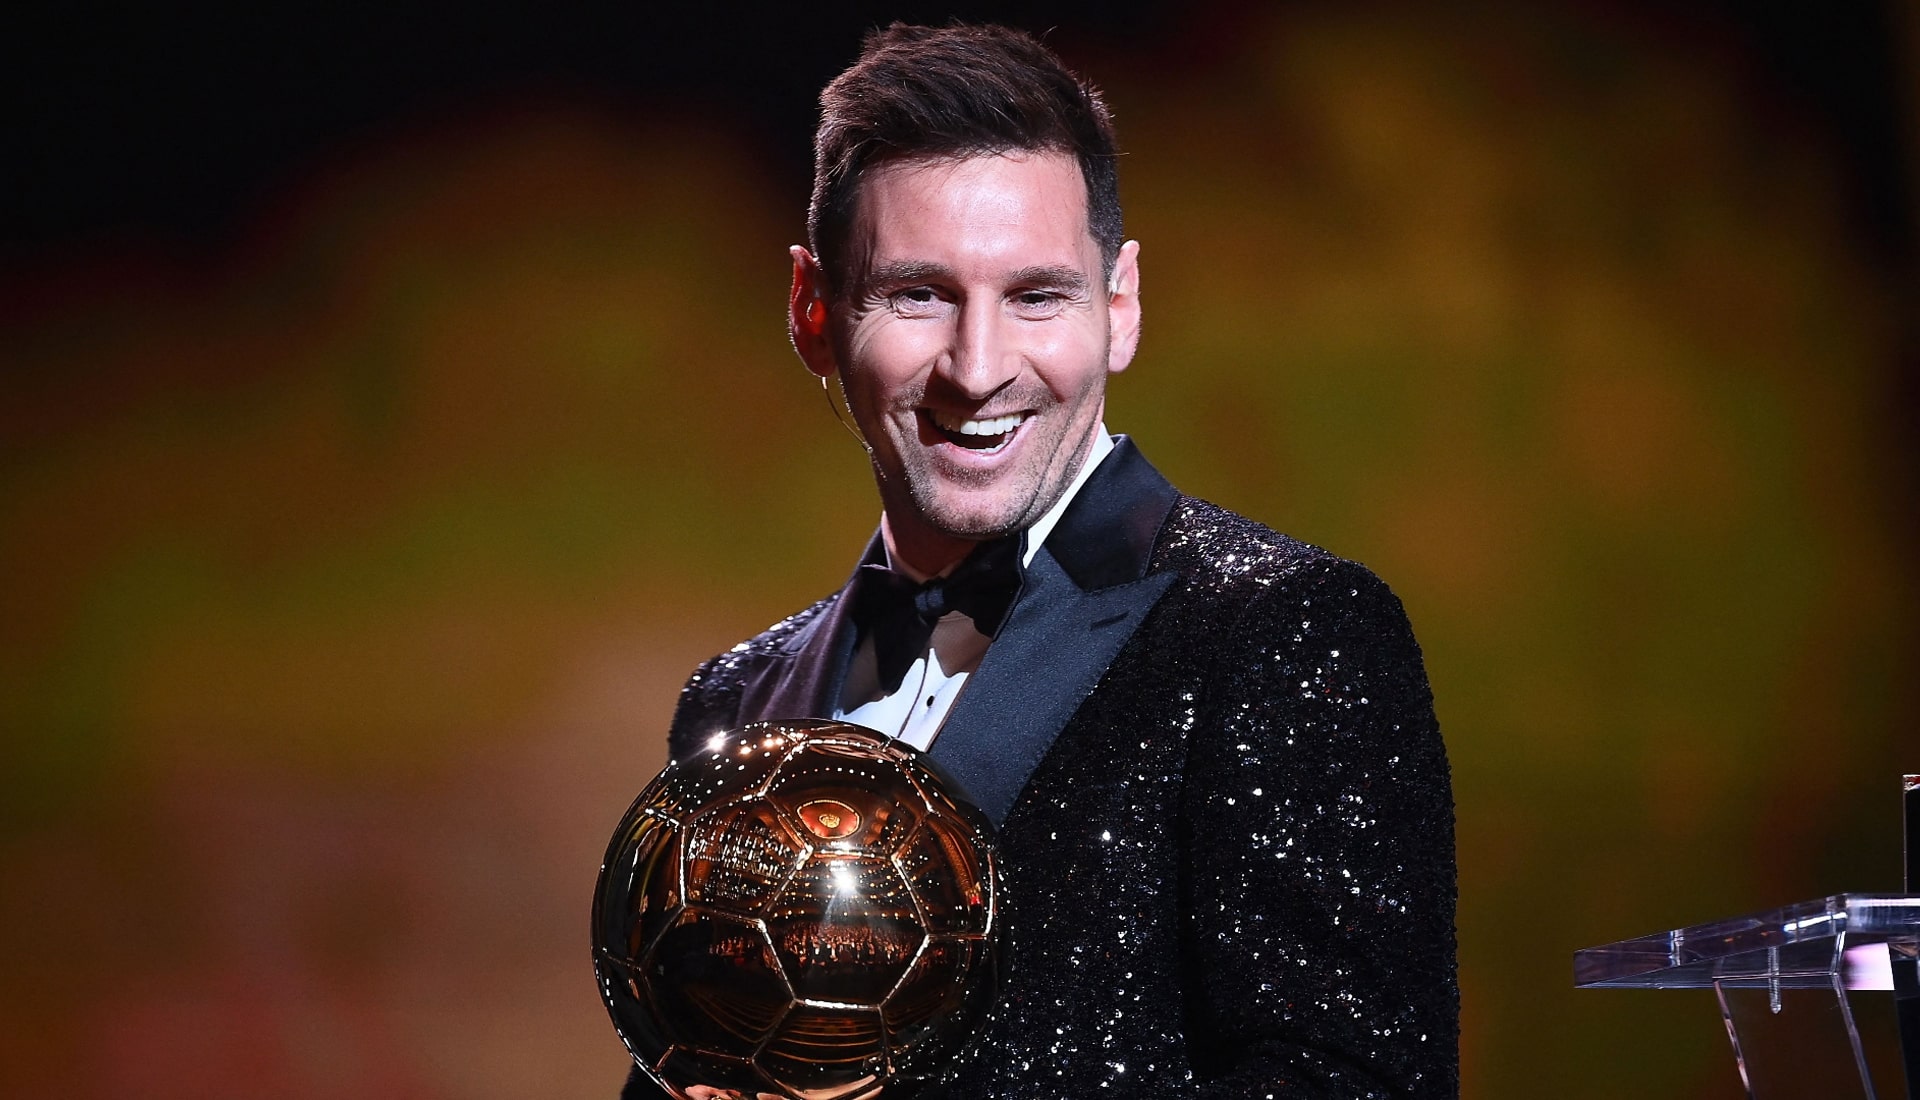 adidas Celebrate Messi's 7th Ballon d'Or Win With 7 Golden Goats -  SoccerBible